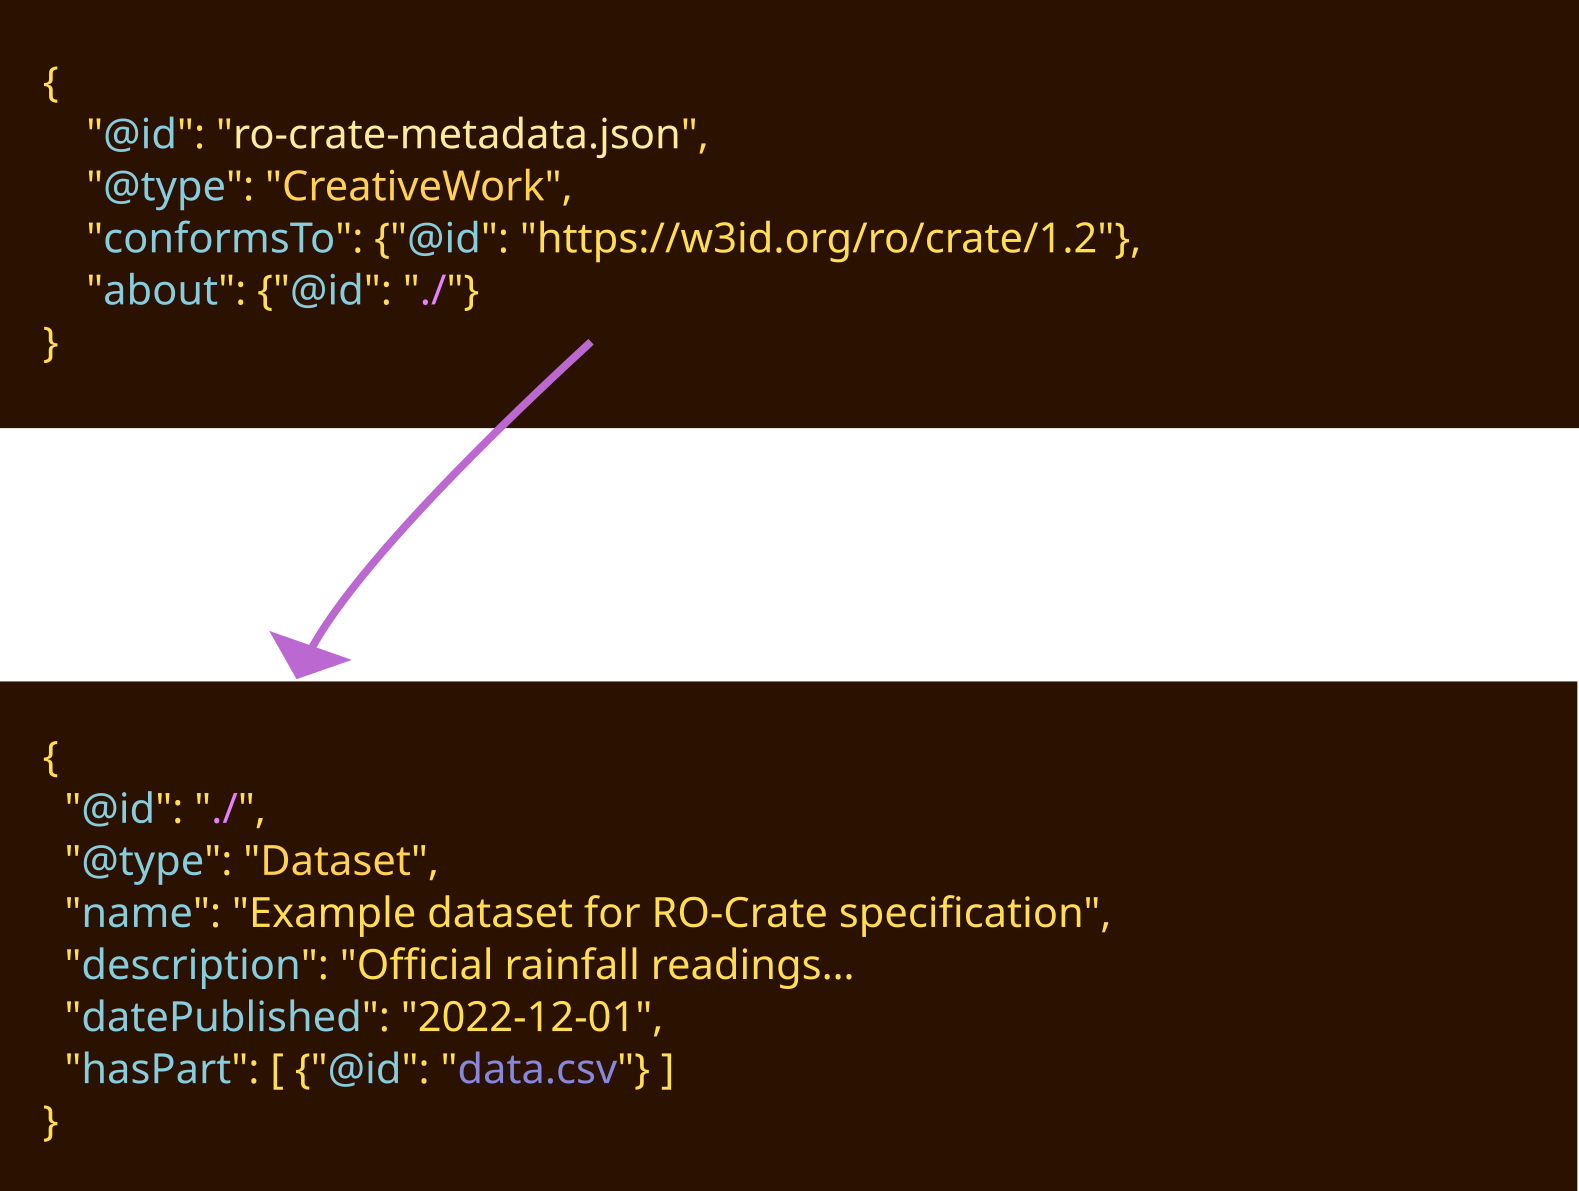 JSON block with id `ro-crate-metadata.json` has some attributes, `conformsTo` RO-Crate 1.2, and `about` referencing id `./`. In second JSON block with id <code>./</code> we see additional attributes such as its name and description.